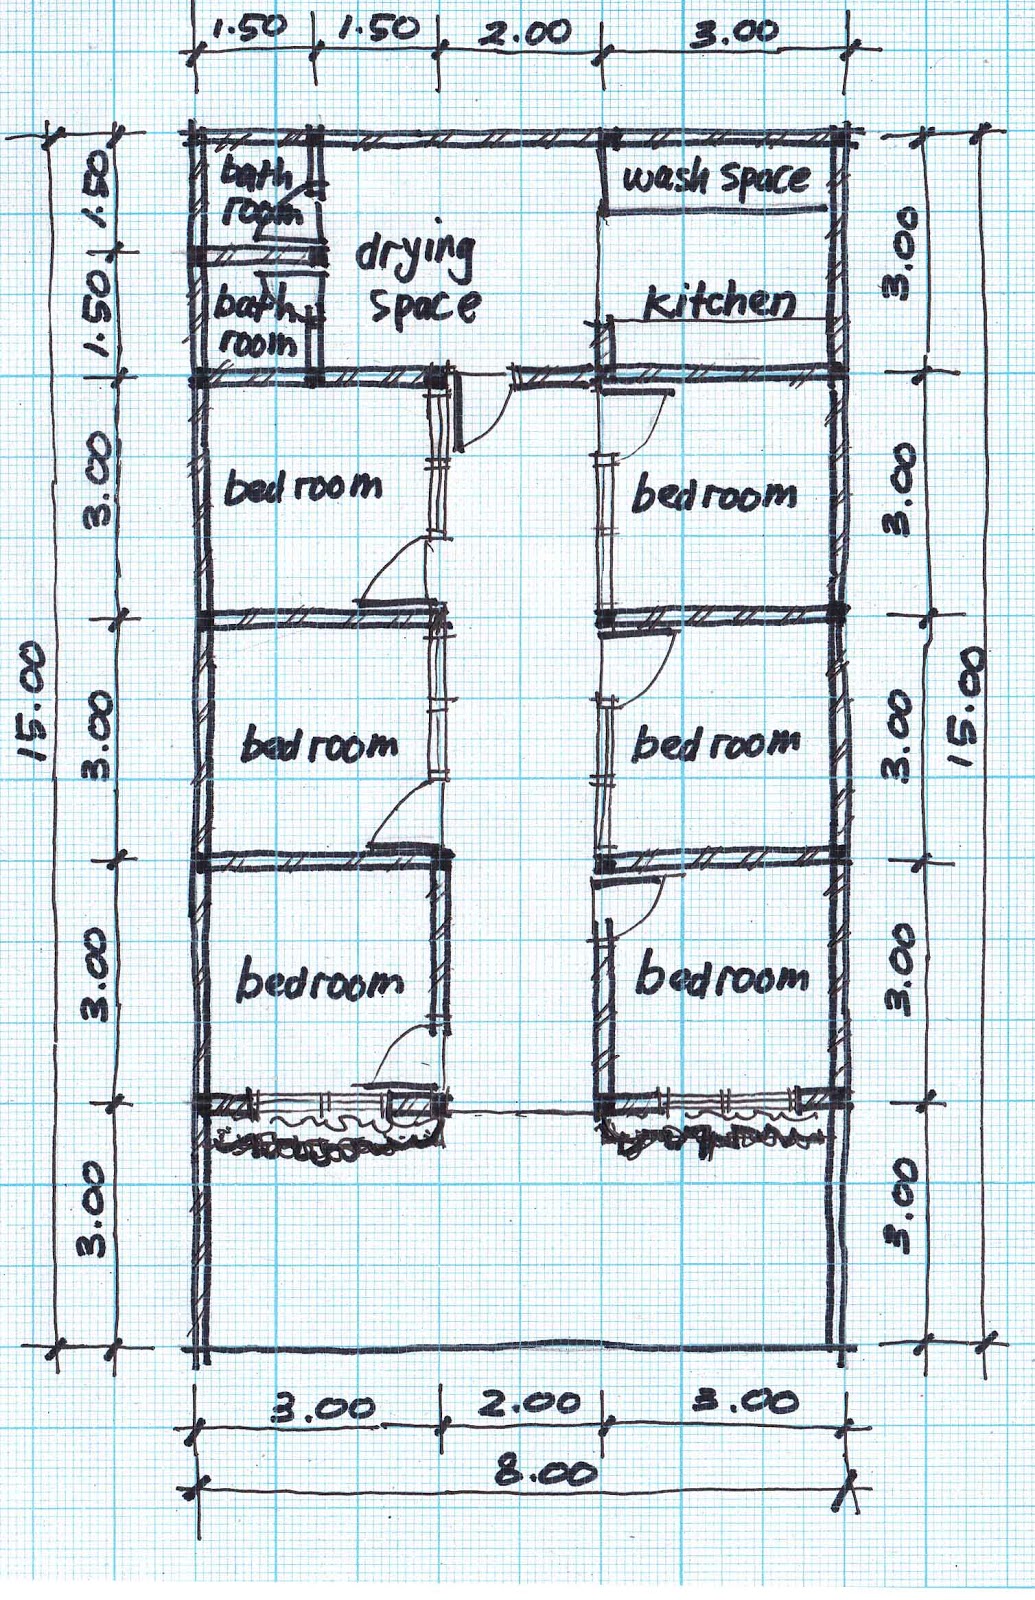 HOUSE PLANS FOR YOU SIMPLE HOUSE PLANS